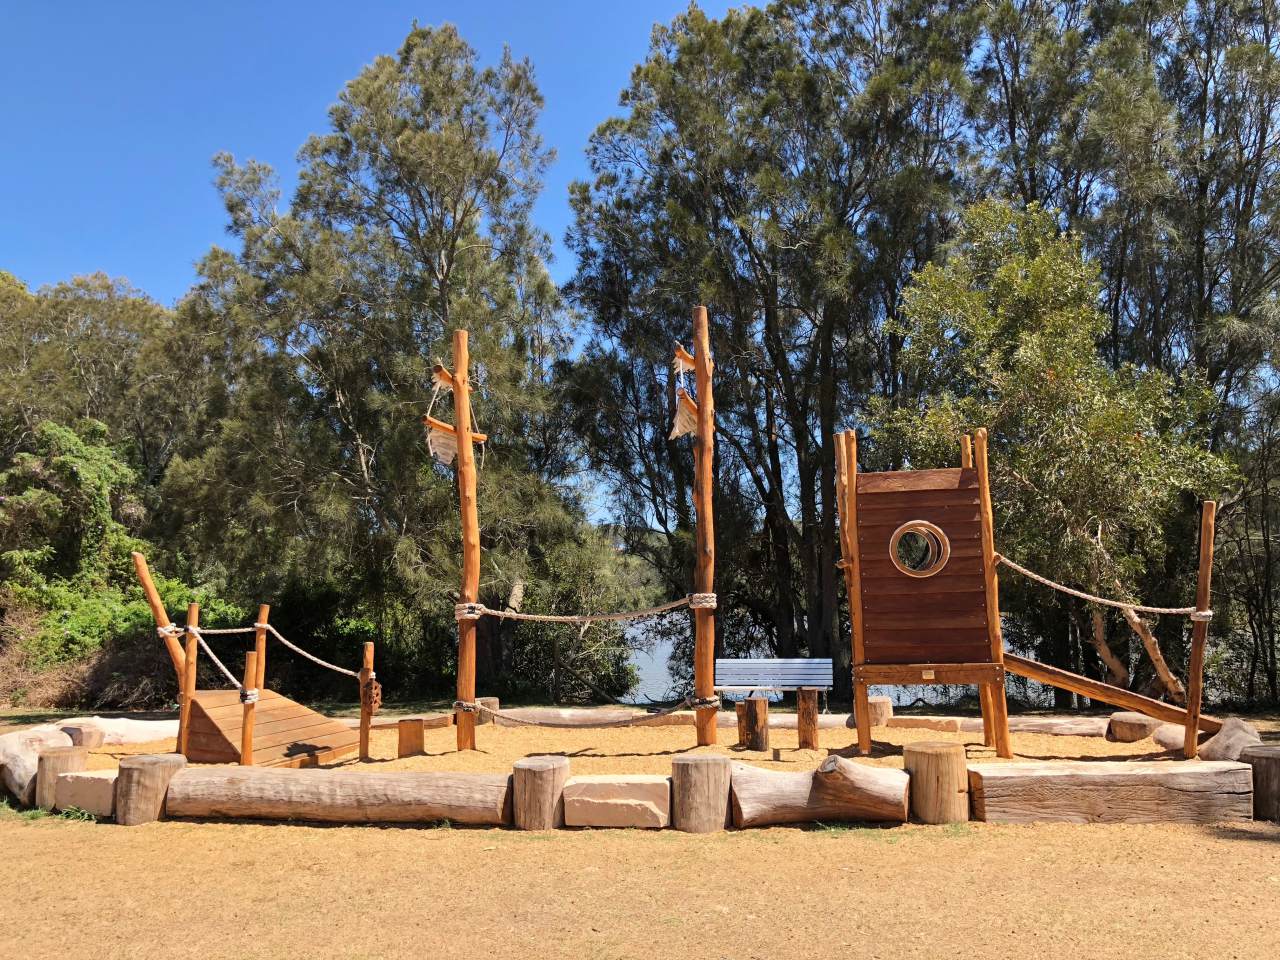 The pirate ship at Terrigal Rotary Park